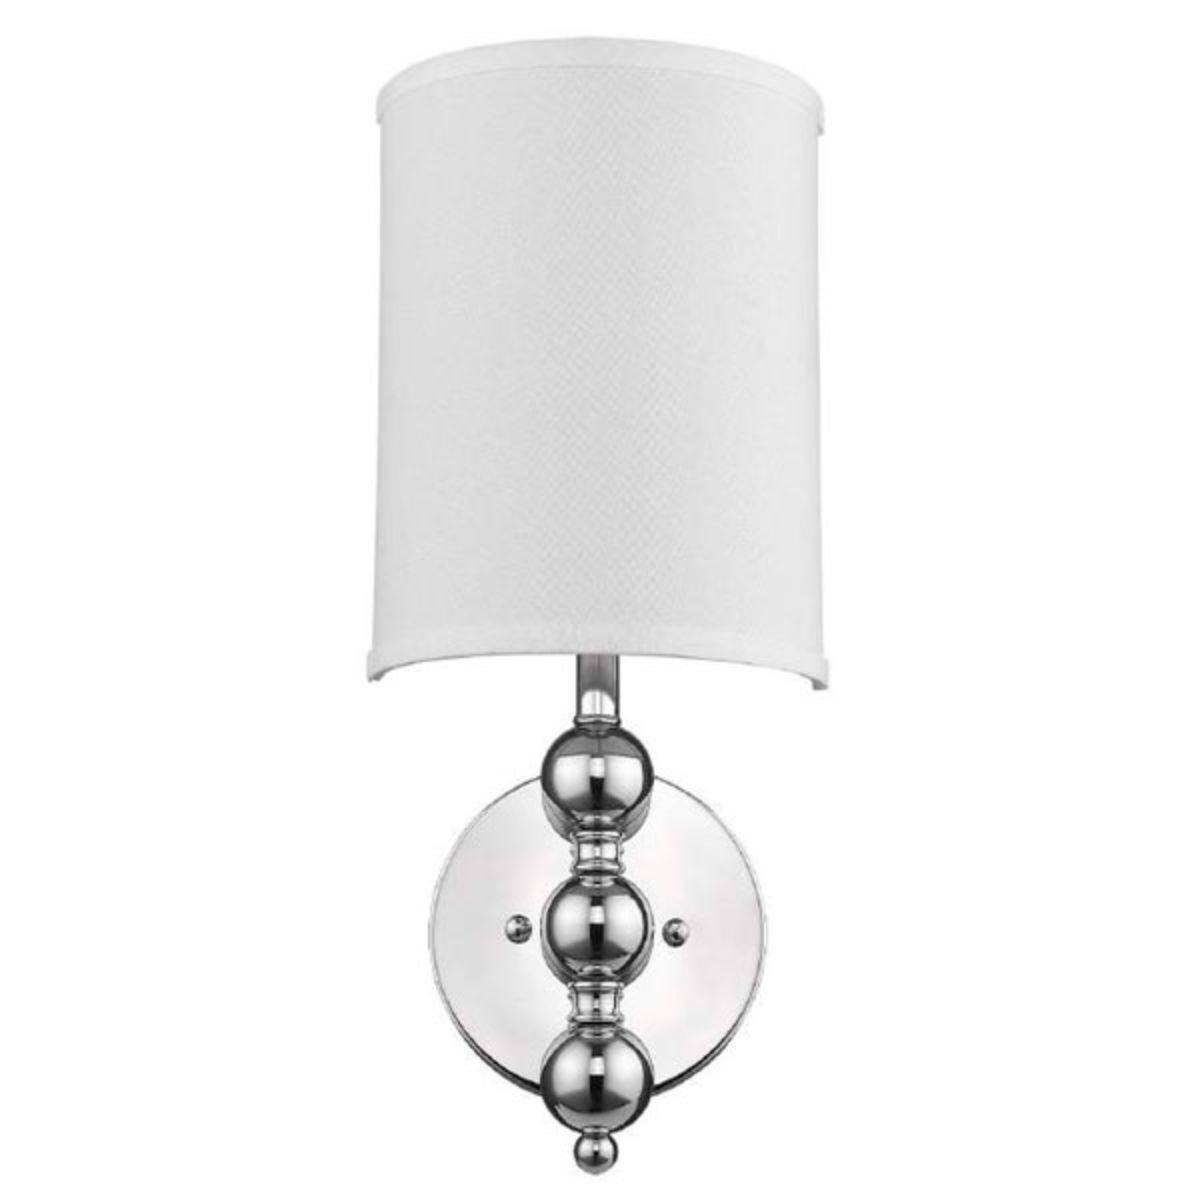 St. Clare 19 in. Flush Mount Sconce Chrome Finish